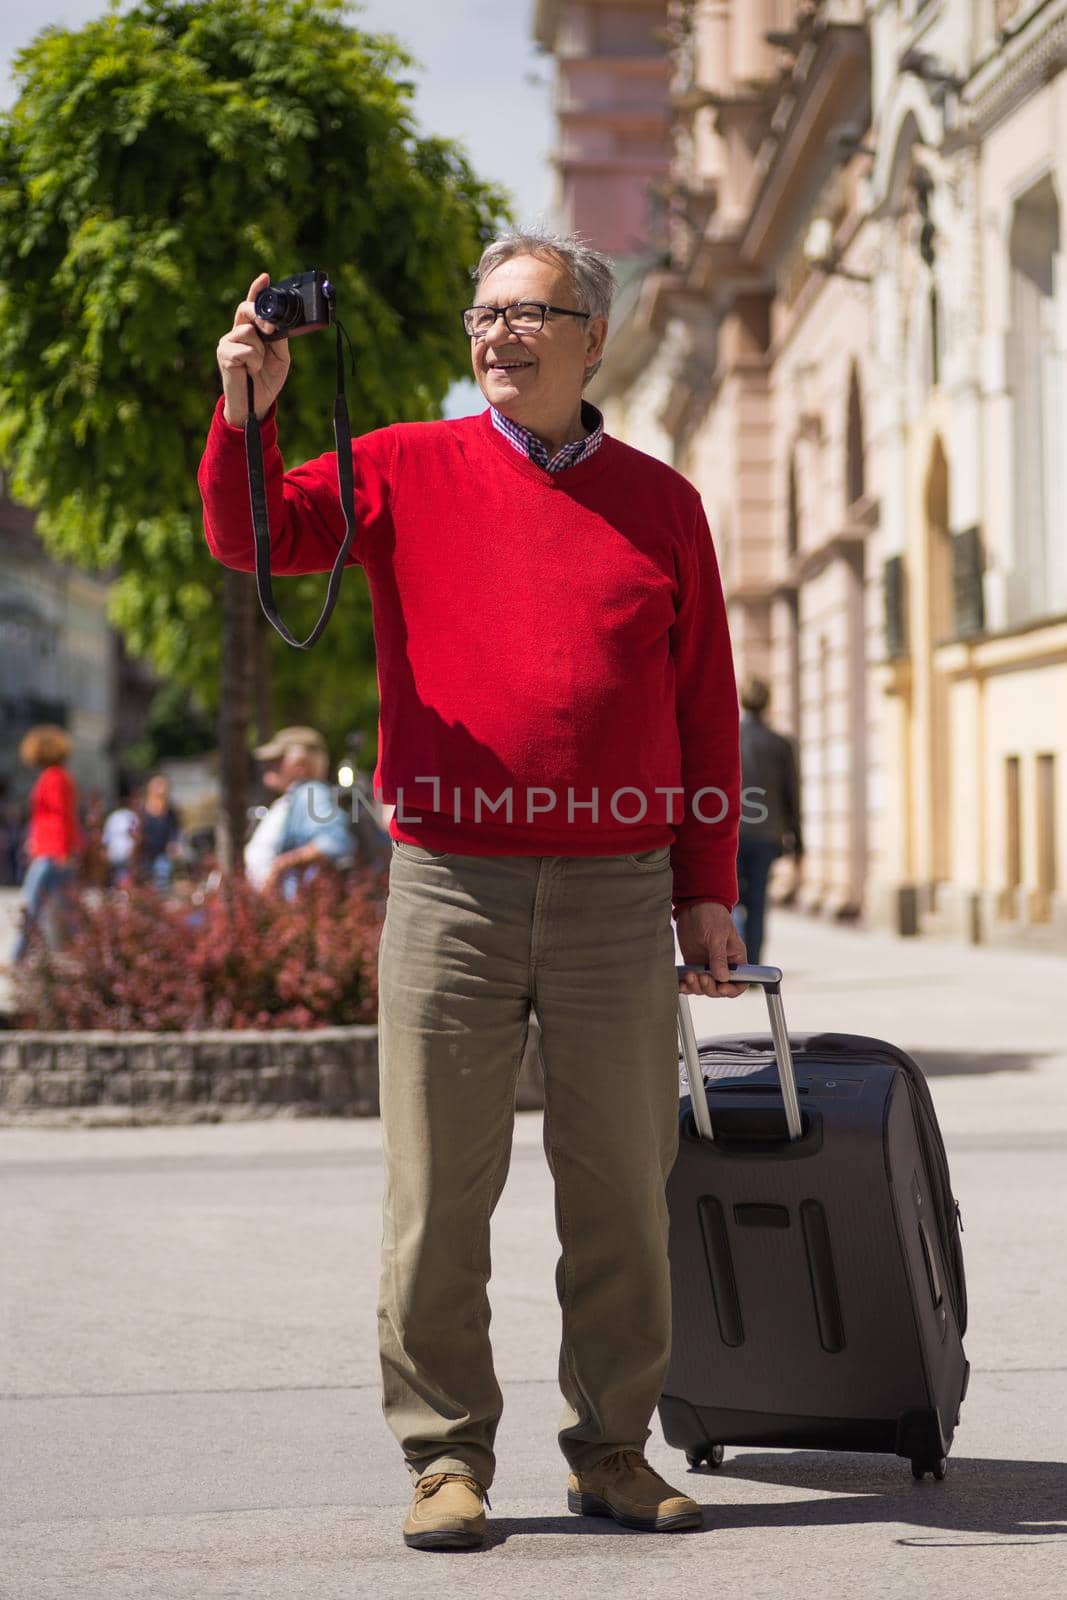 Senior man tourist enjoys photographing at the city.Image is intentionally toned.